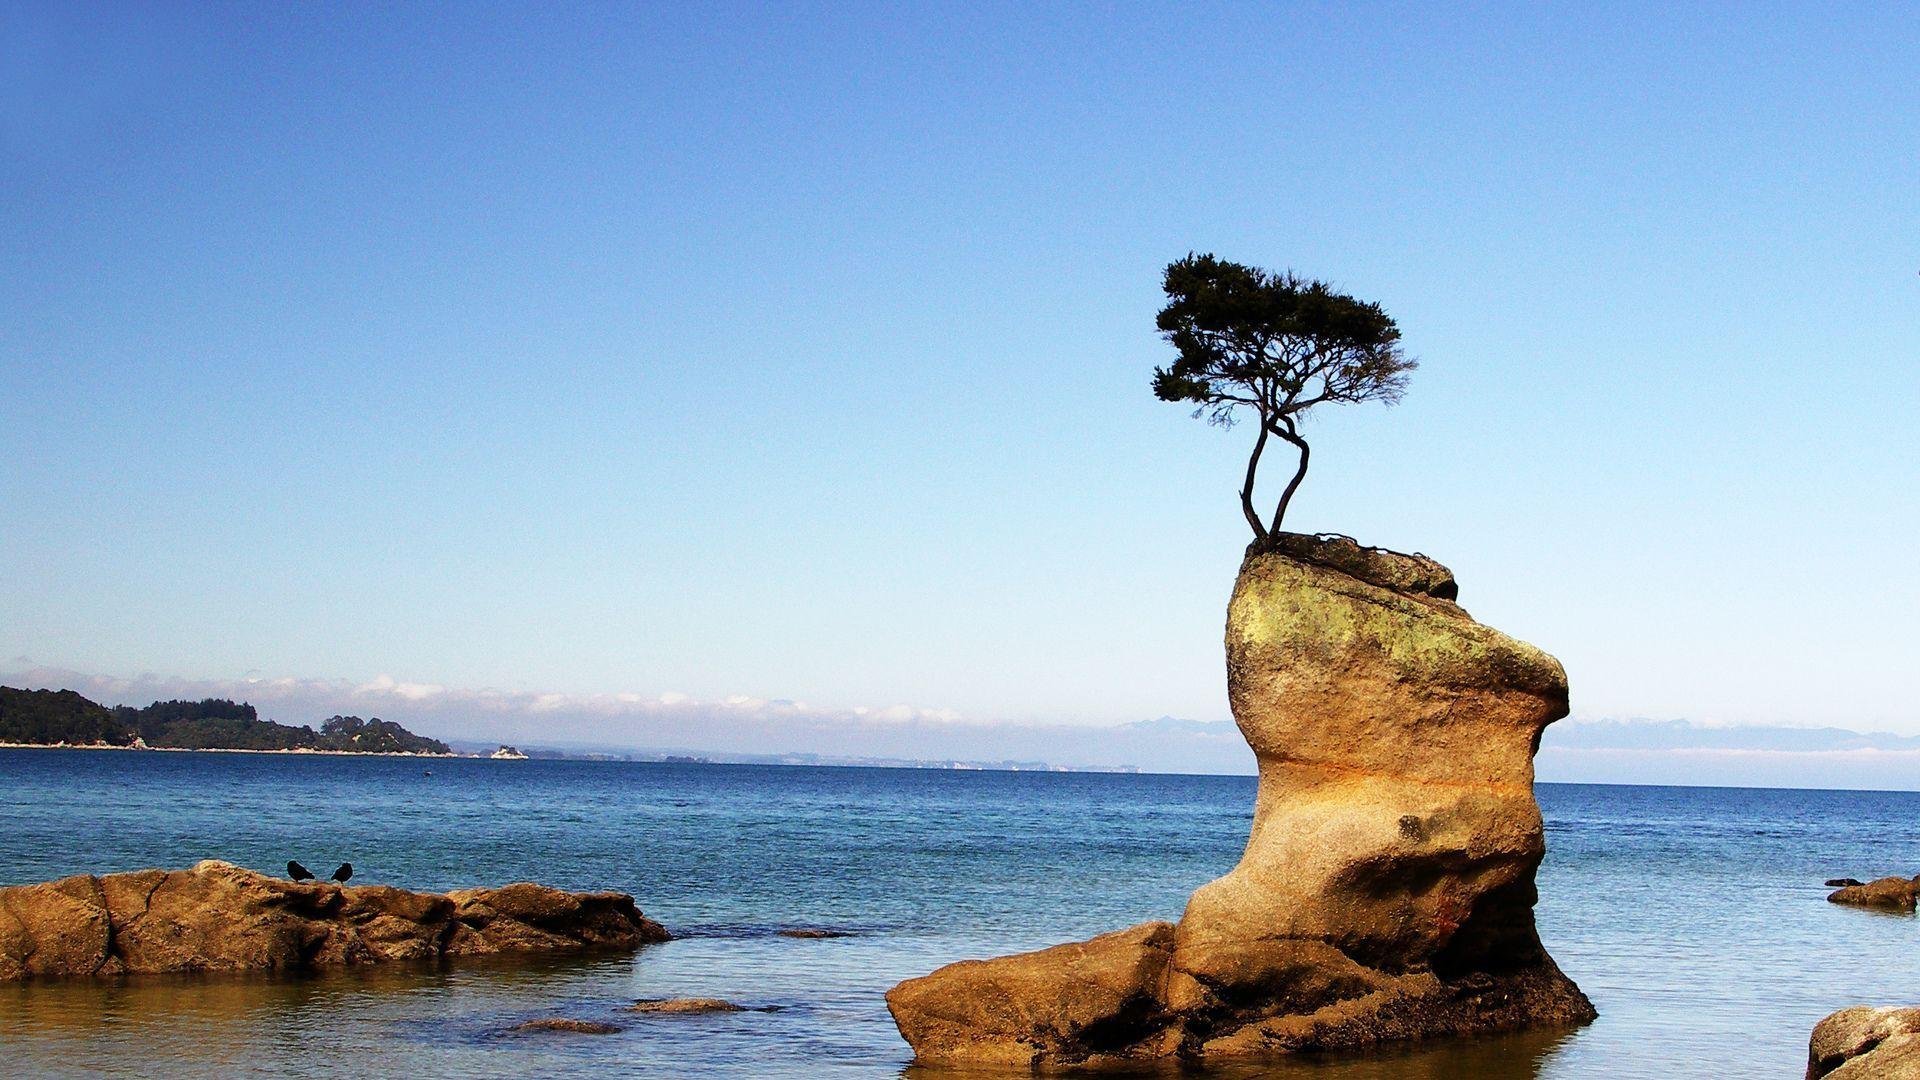 Tree growing on a rock at the seashore Wallpaper